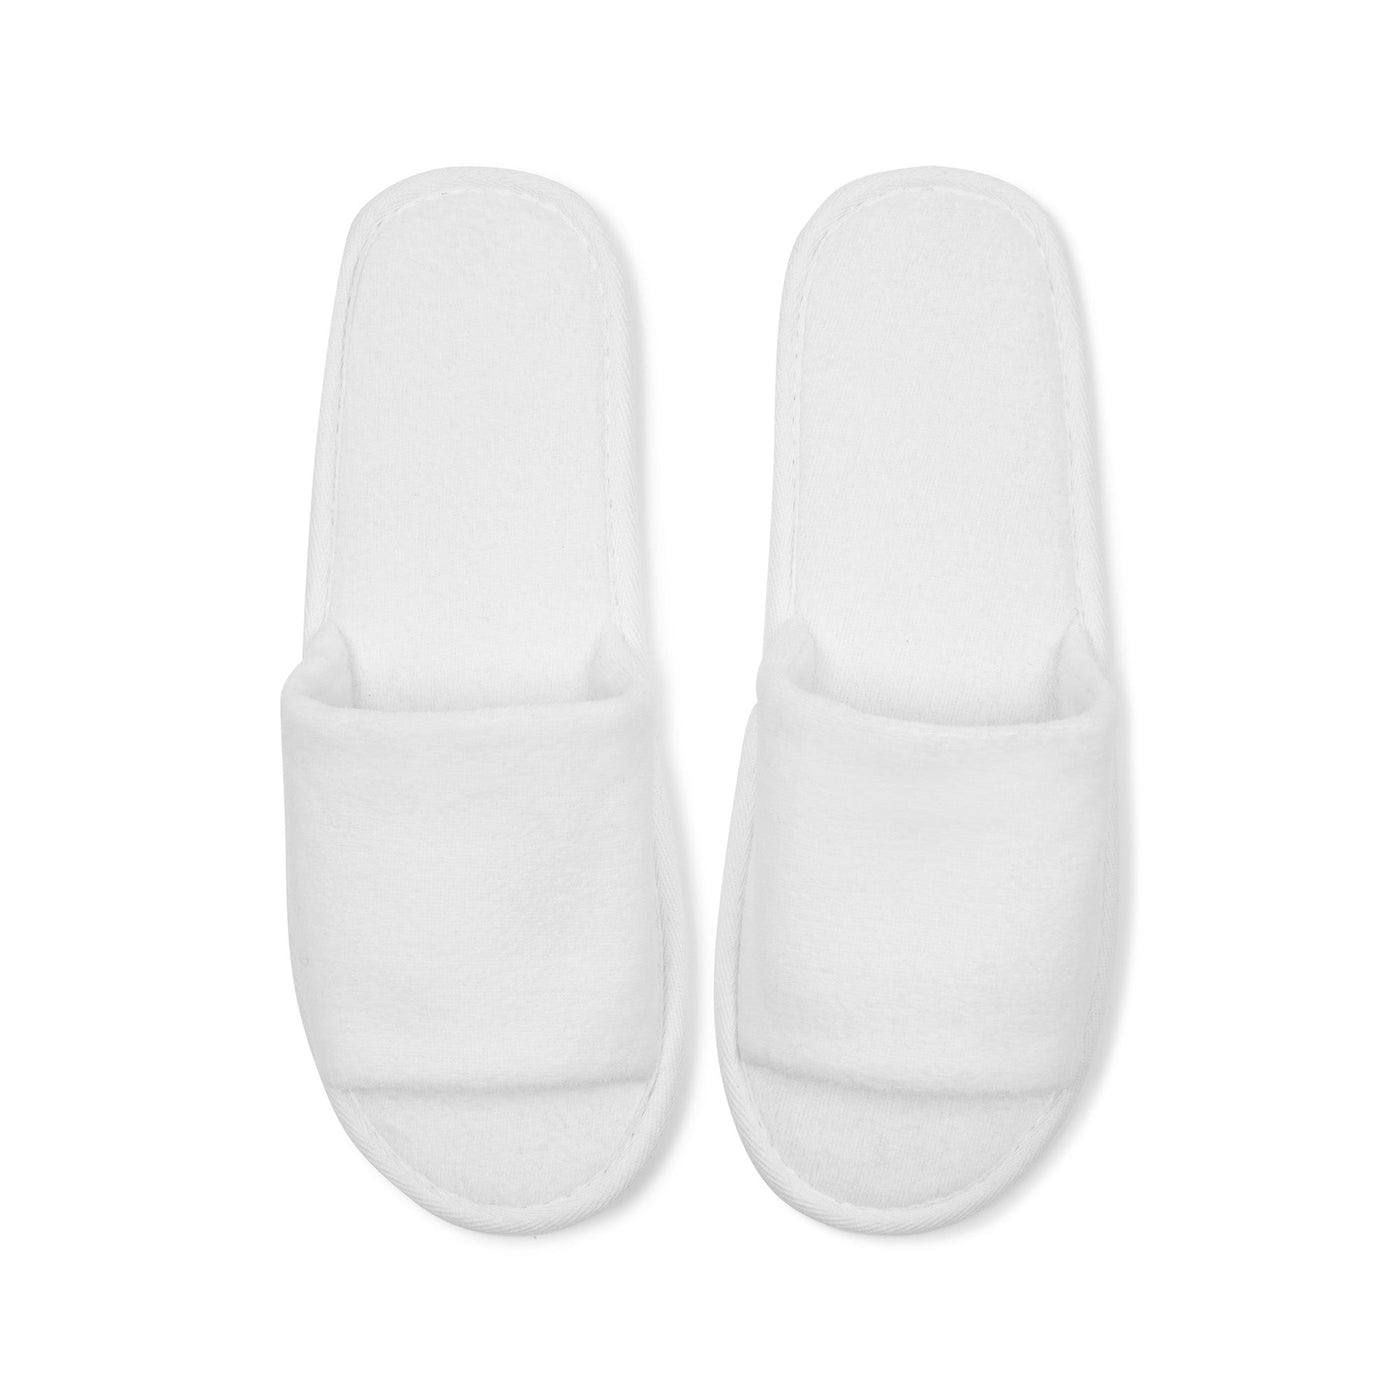 SOMERSET Eco Friendly, Biodegradable, Plastic Free Velour Open Toe Slippers White - Pack of 100